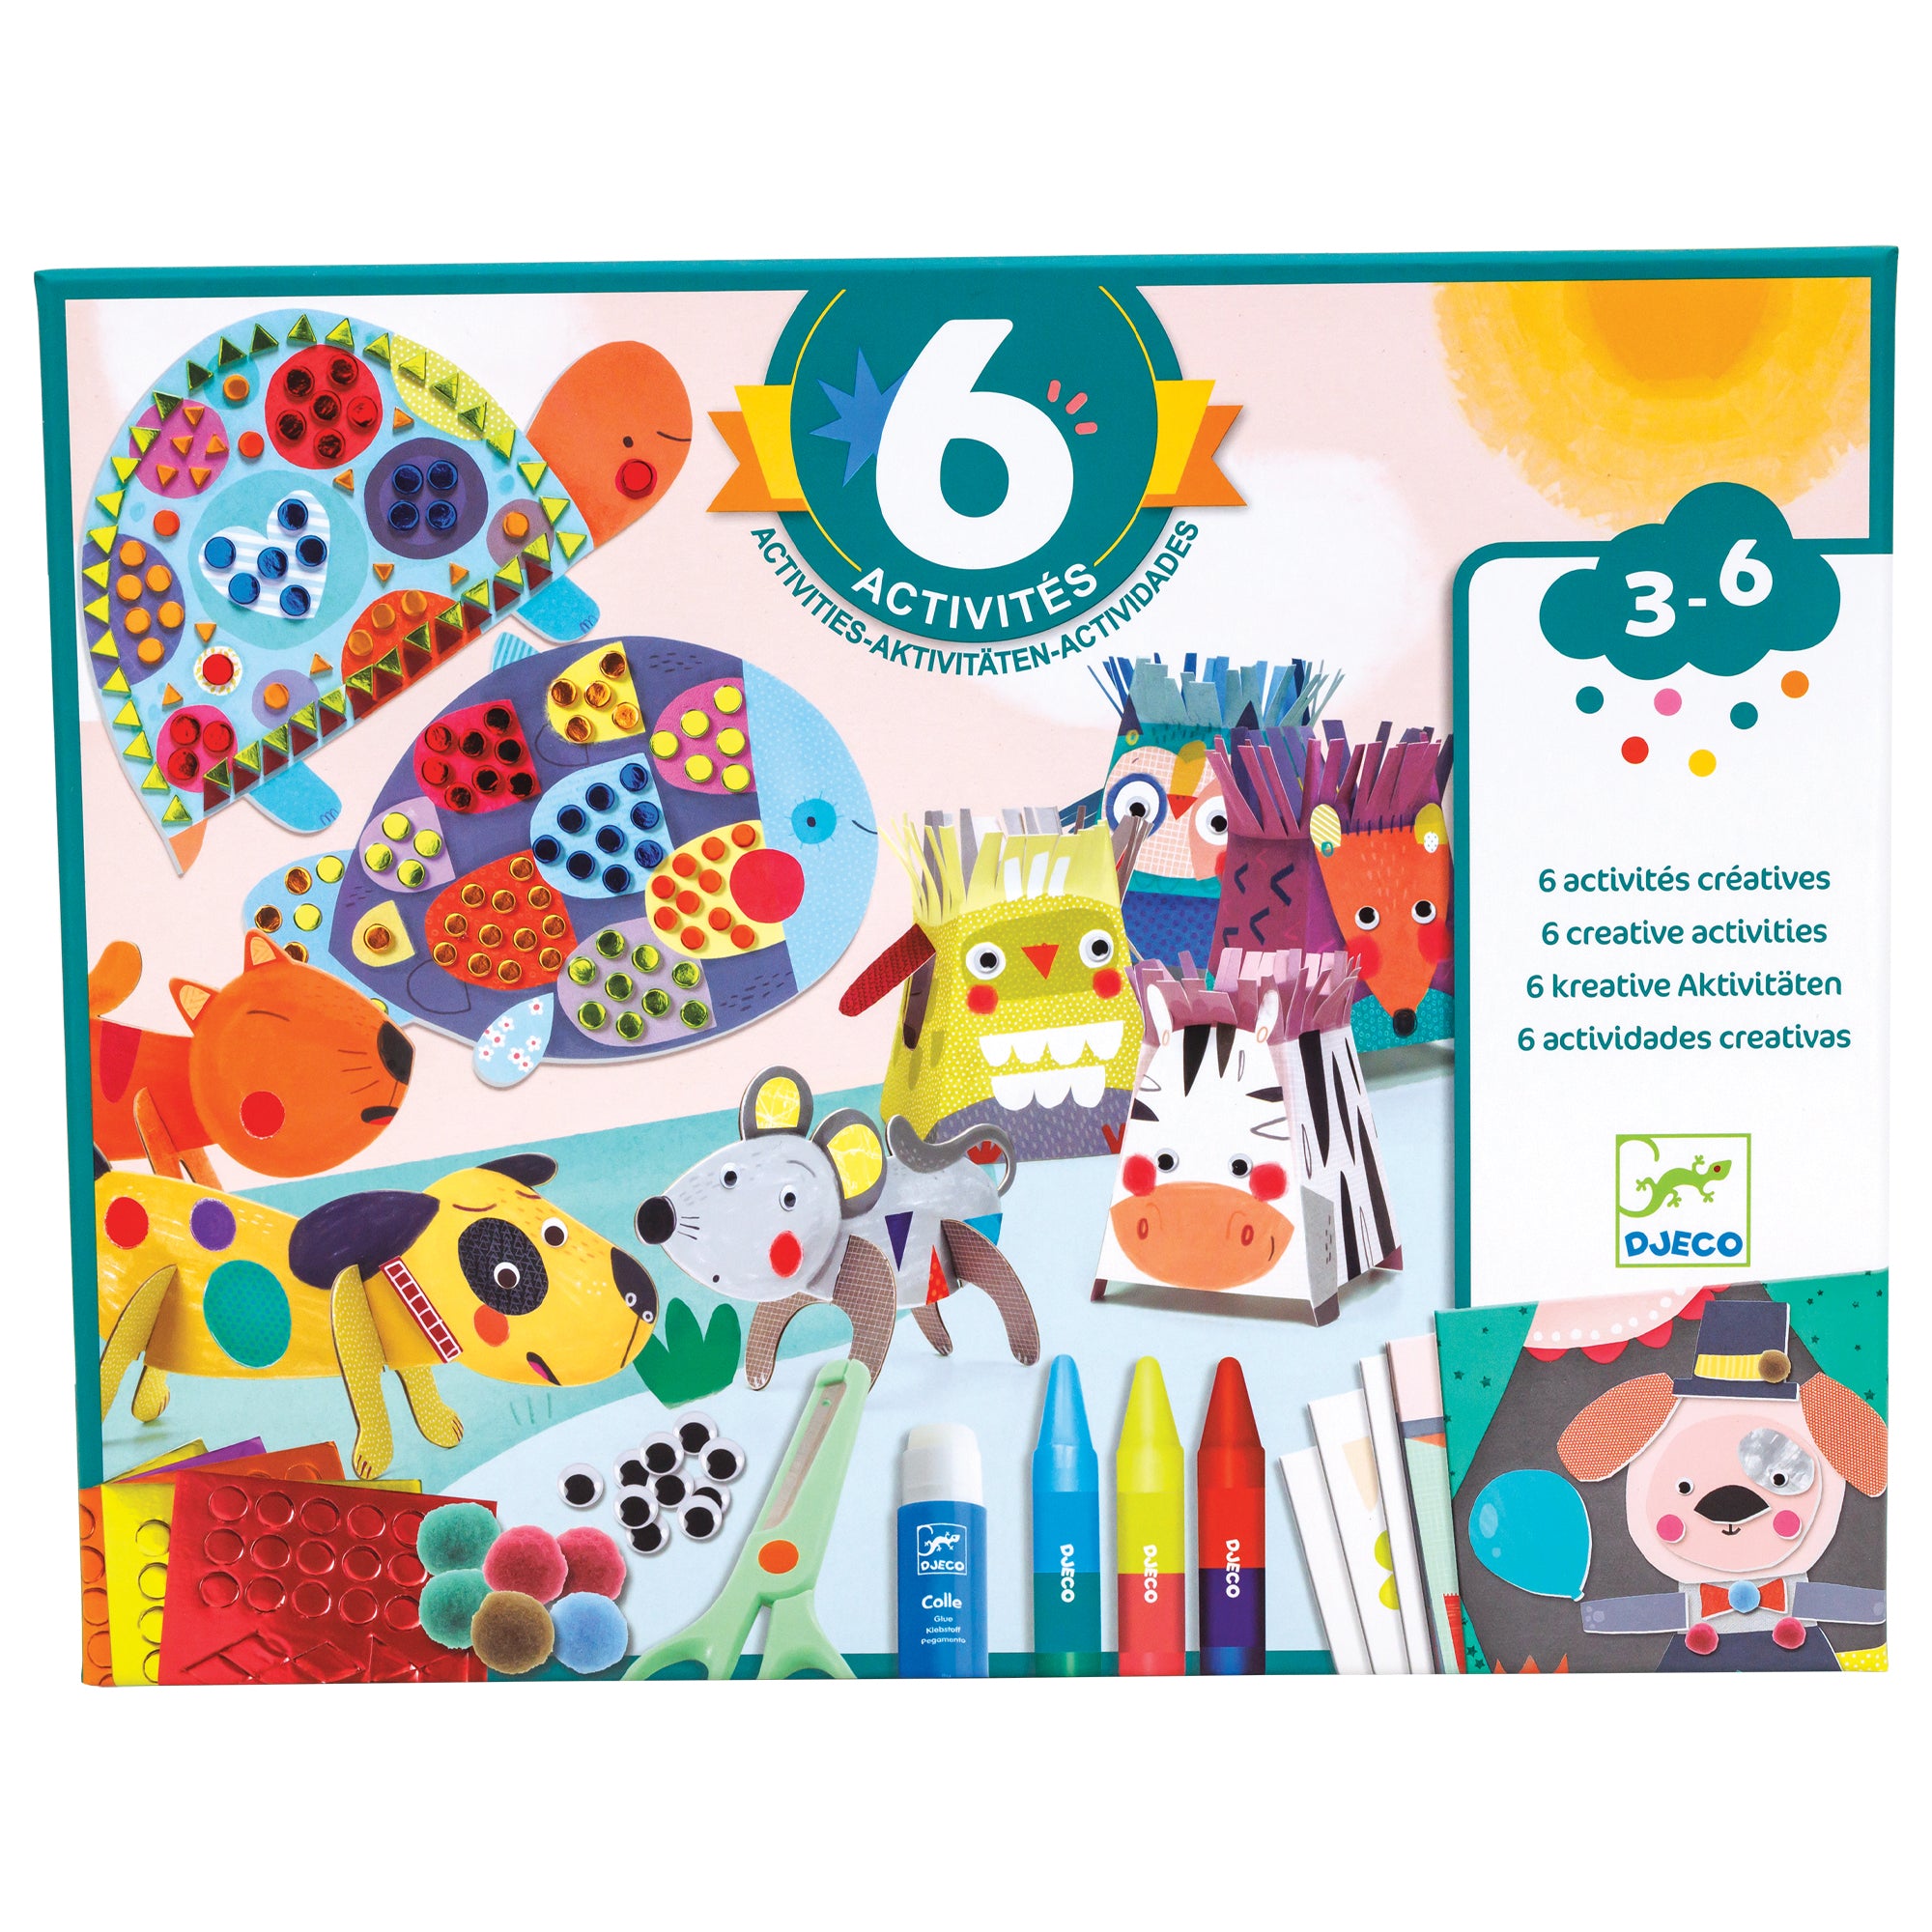 The Djeco Animals and Their Homes, Multi-Activity Box. On the busy cover, you can see all the animal projects with the pieces for the projects. In the top right are a jeweled turtle and fish. In the middle are 4 box-shaped animals. In the lower-left are a 3 D standing cat, dog, and mouse. Along the bottom of the box are sticker sheets, pom-poms, eyes, scissors, a glue stick, crayons, and project sheets. Age recommendation is 3 to 6.